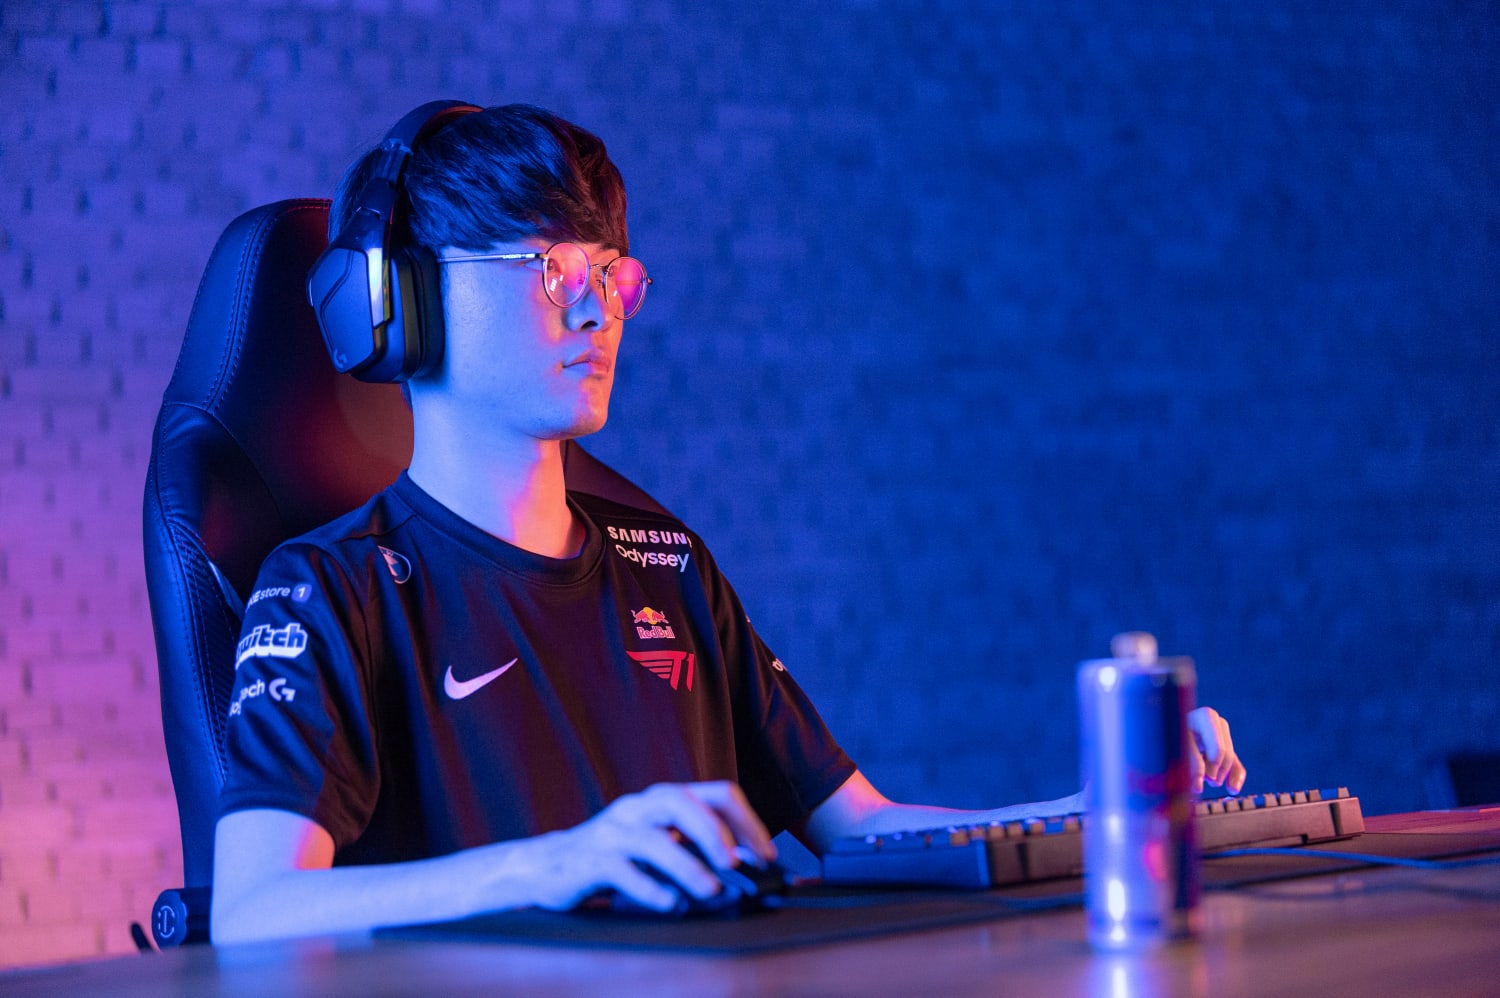 T1 'League Of Legends' Team Benches Faker Due To Injury